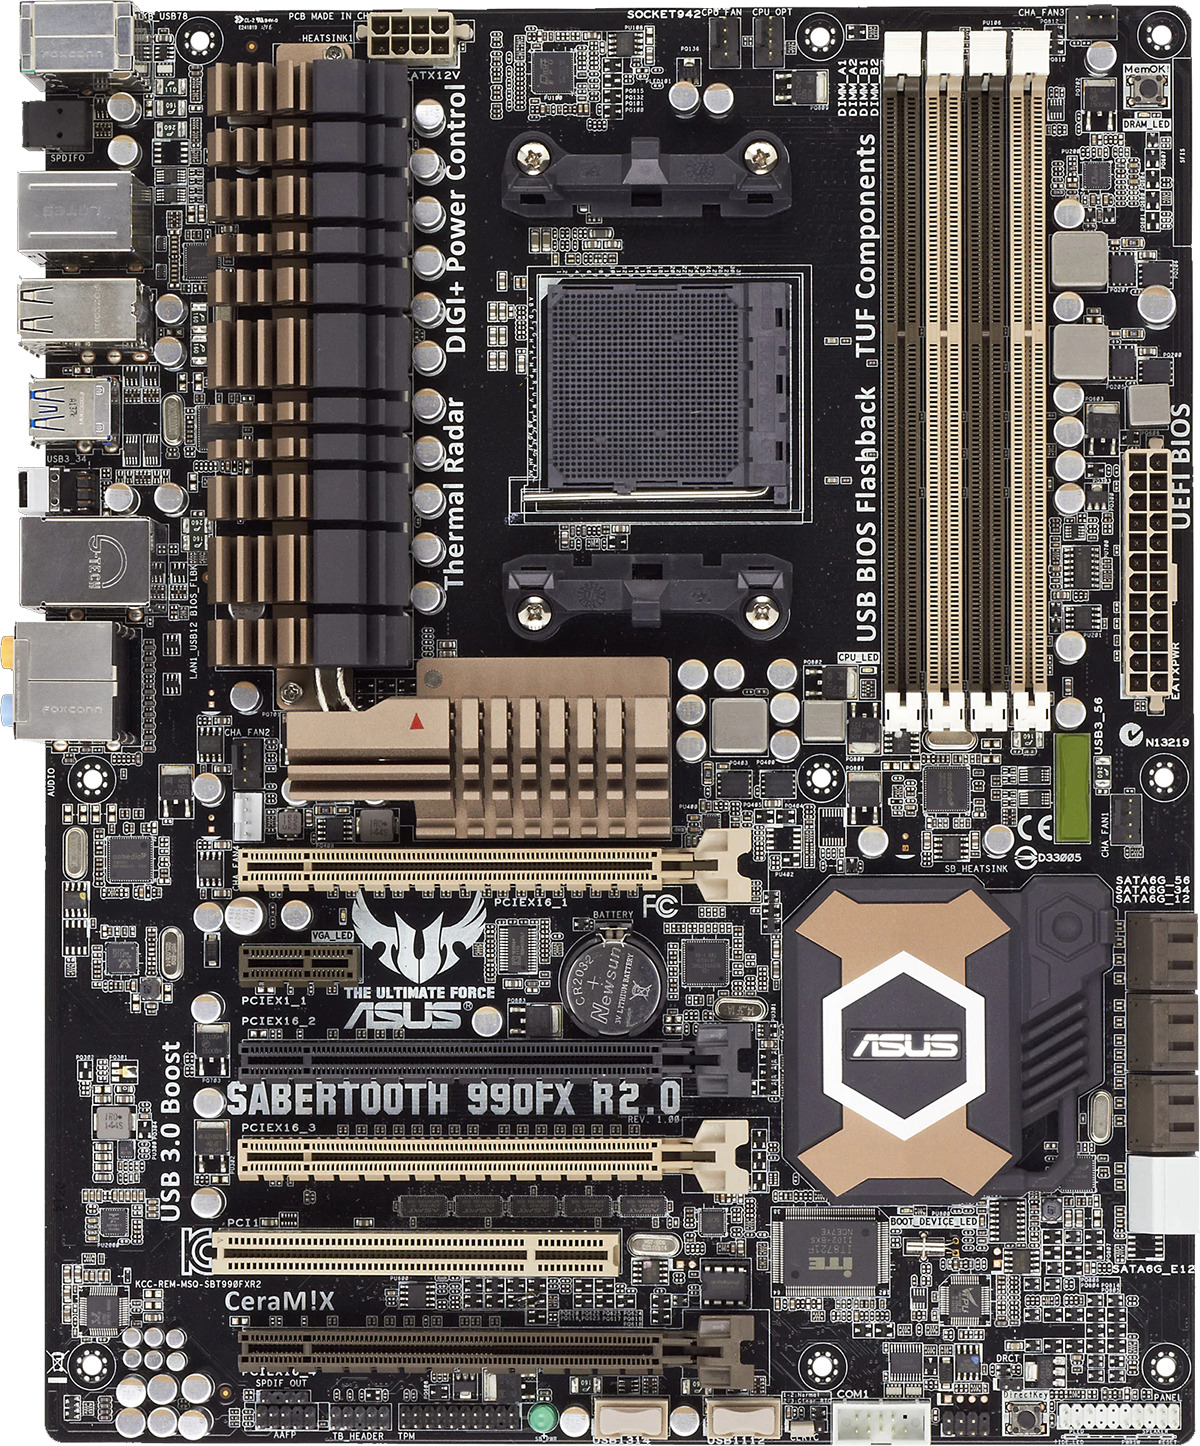 FOR ASUS TUF SABERTOOTH 990FX R2.0 Motherboard AM3+/AM3 DDR3 32G ATX Systemboard